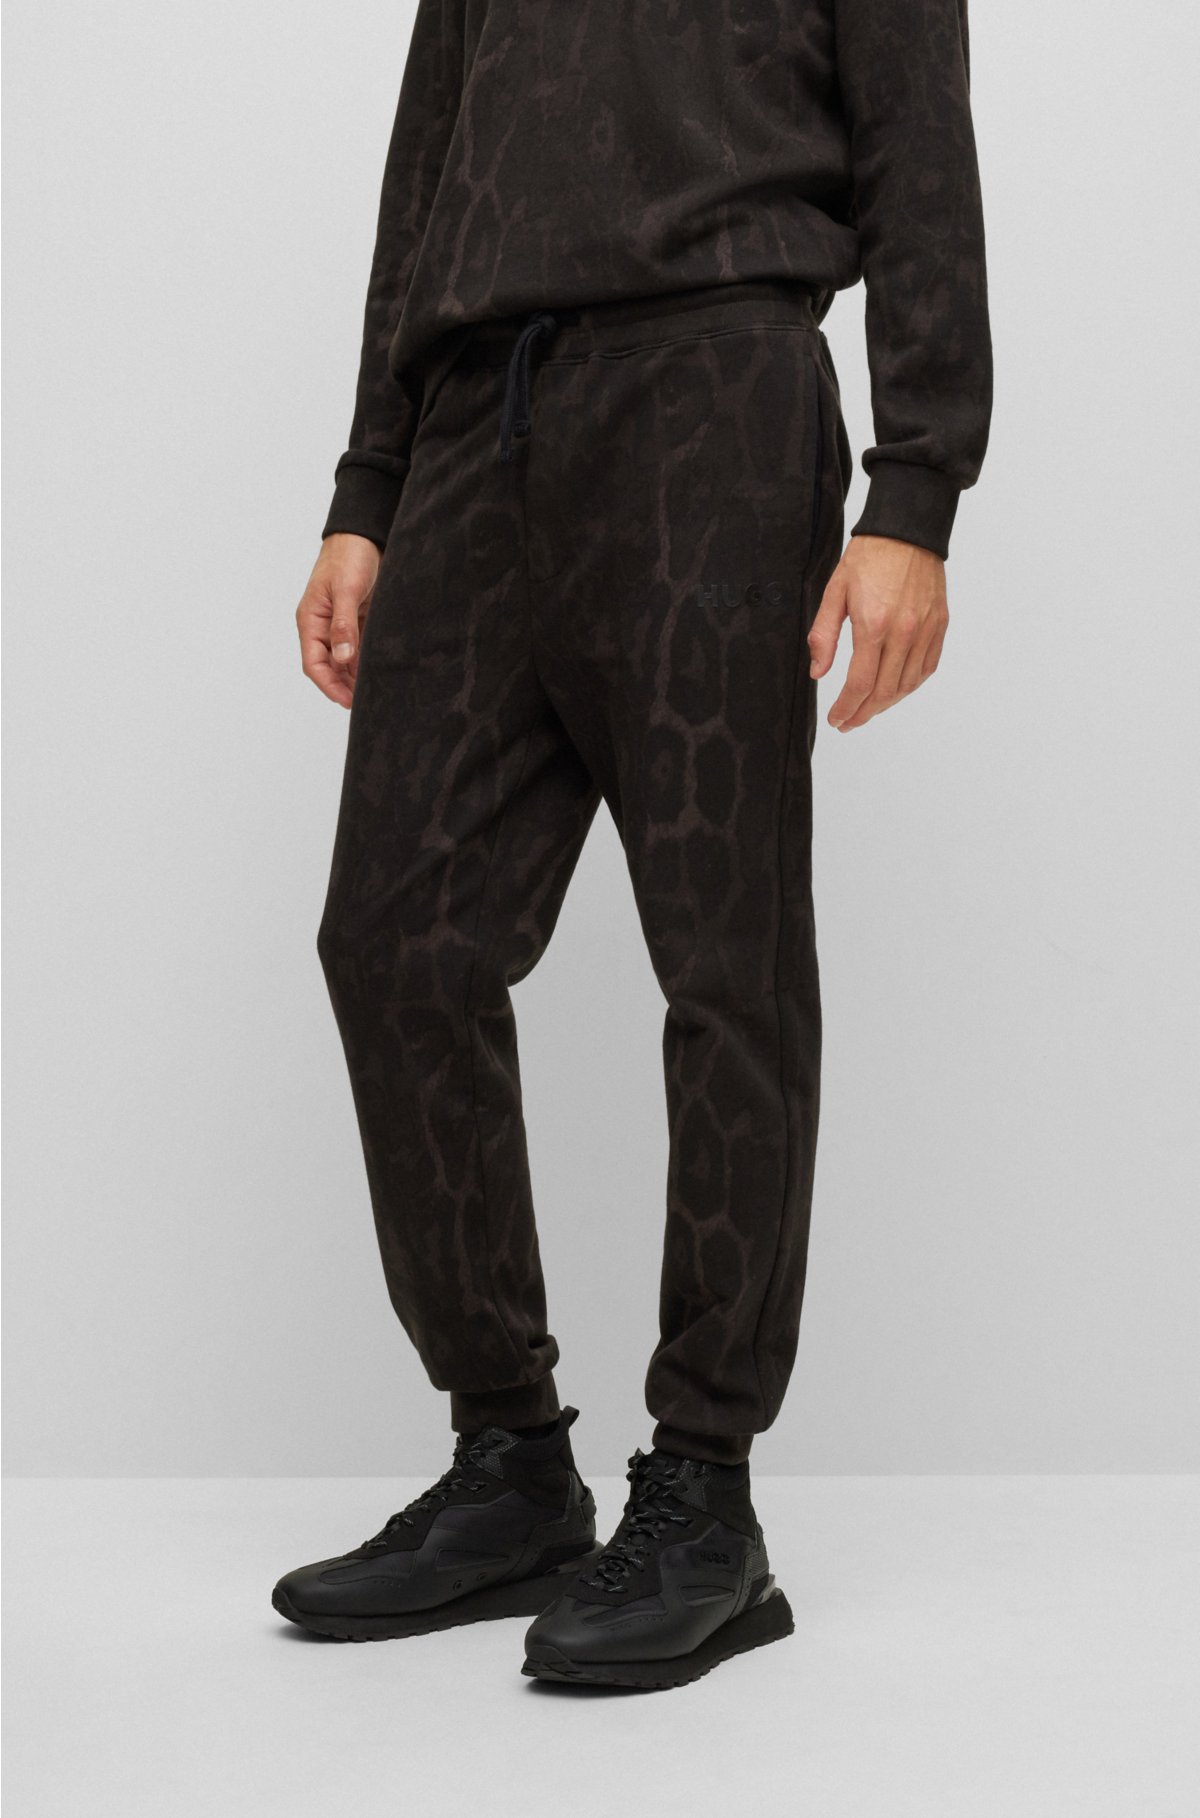 Louis Vuitton Monogram Detail Cargo Trousers, Black, Please Contact Seller for Other Sizes